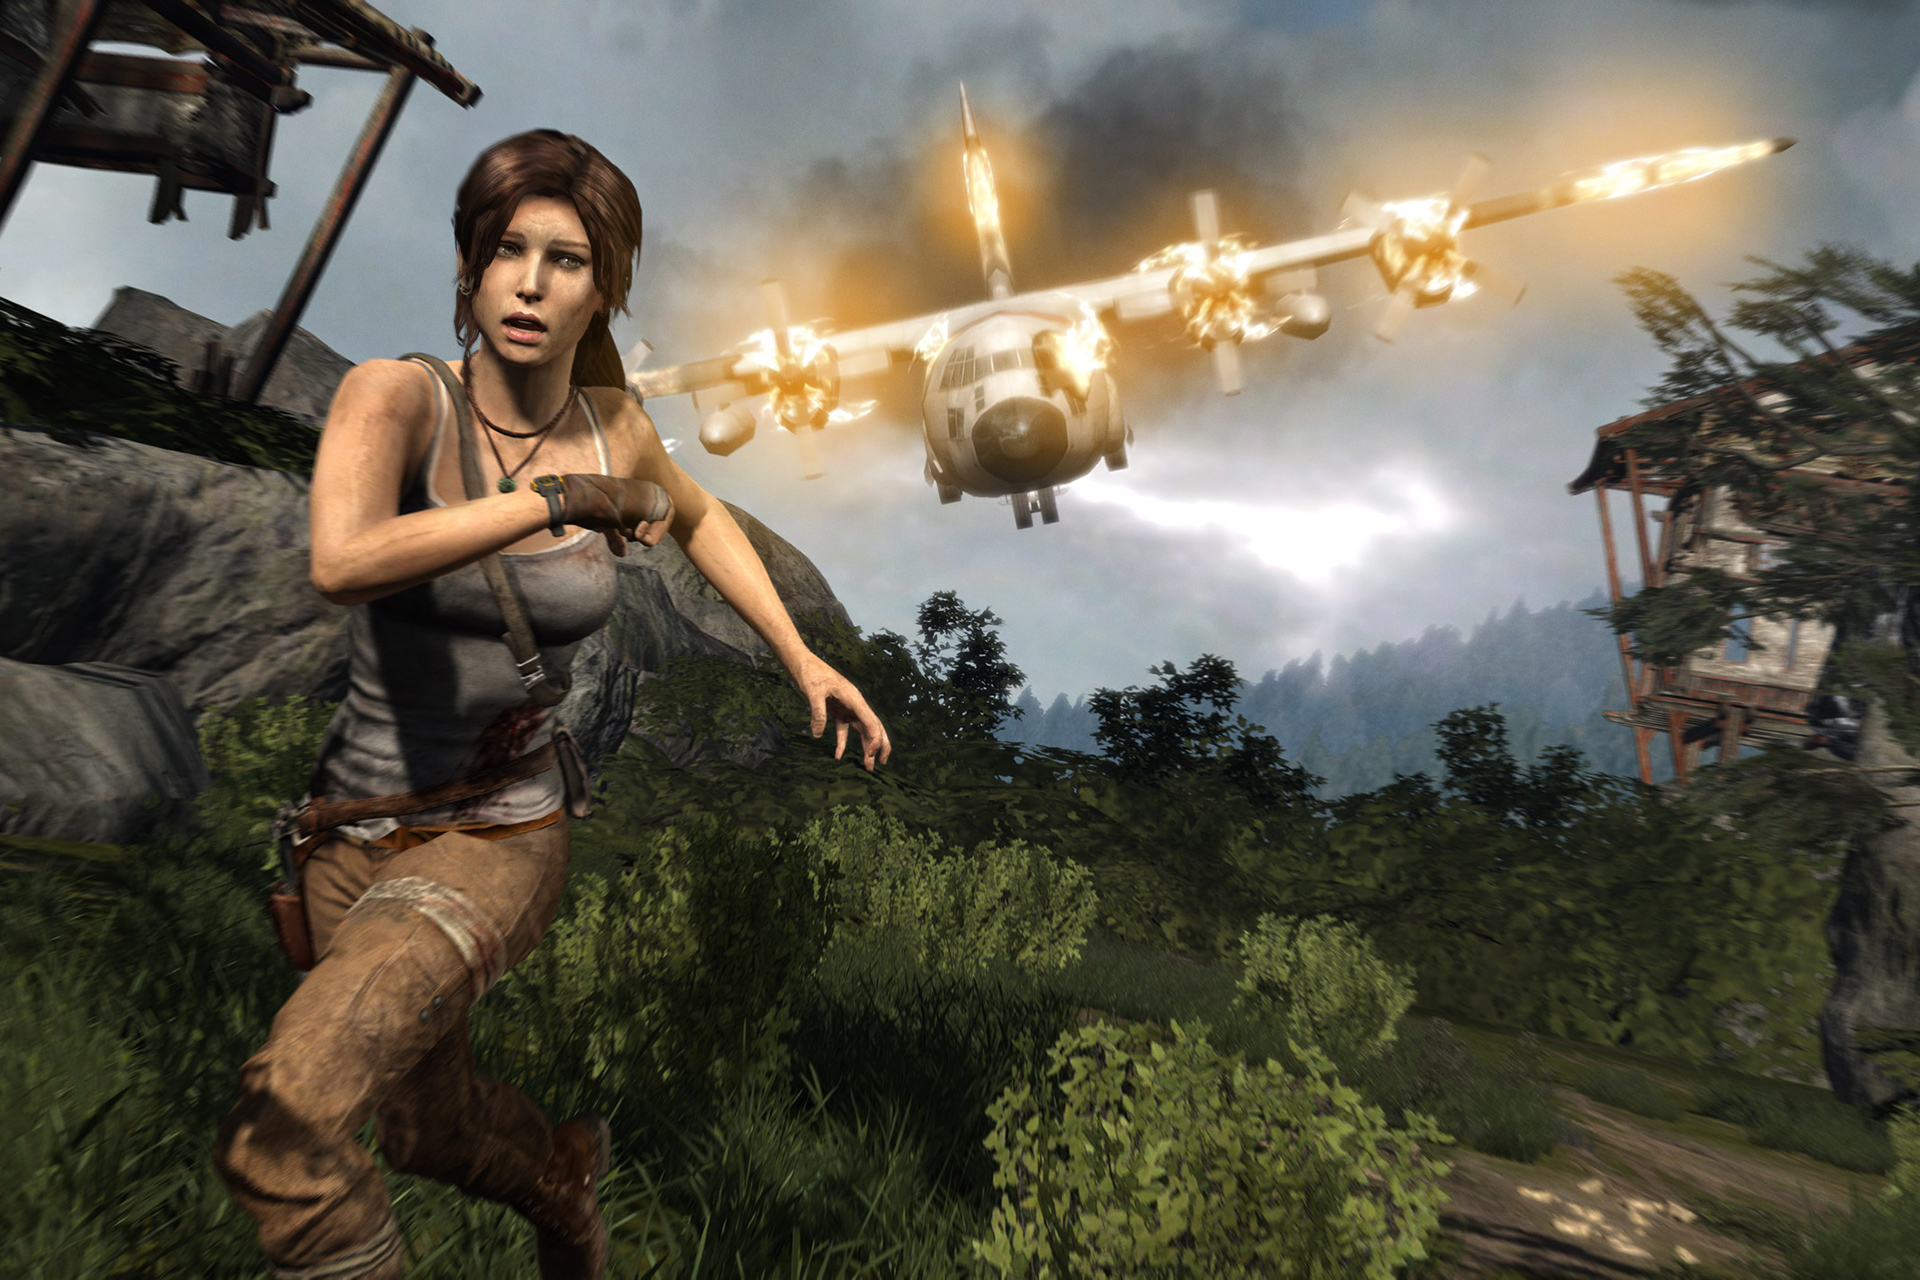 The ‘Tomb Raider’ reboot trilogy is free on the Myth Video games Retailer